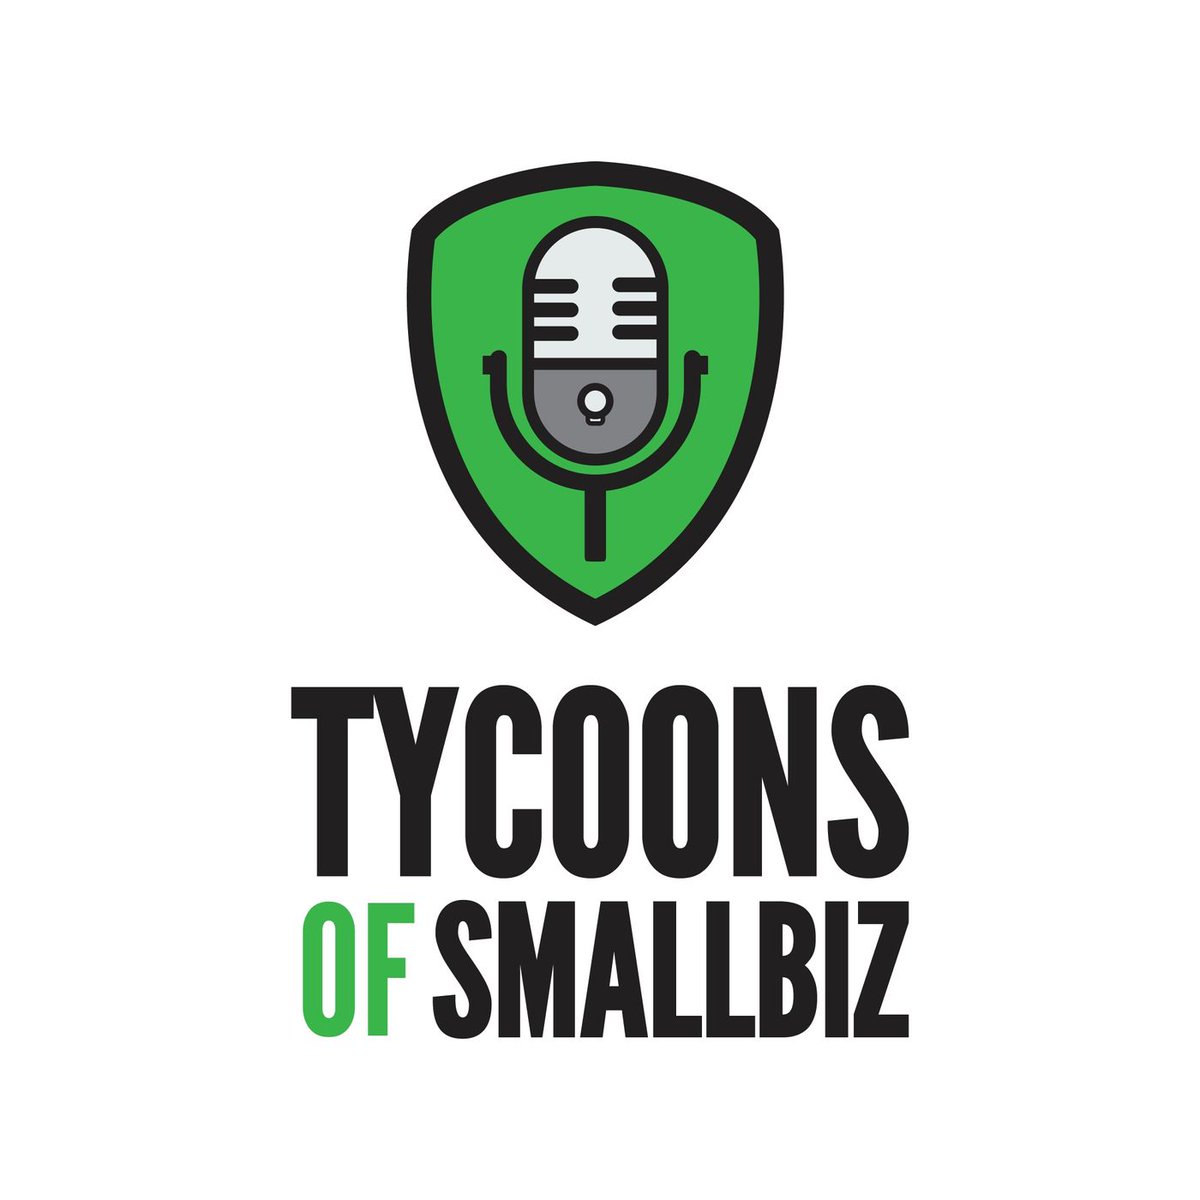 KMS CEO, Tiffany Stovall, was a guest on the podcast 'Tycoons of Small Business'. She talked about her path to becoming CEO, current trends in manufacturing, and the need to develop a pipeline of future skilled workers. Listen to the podcast here: ow.ly/lhje50LWlEJ